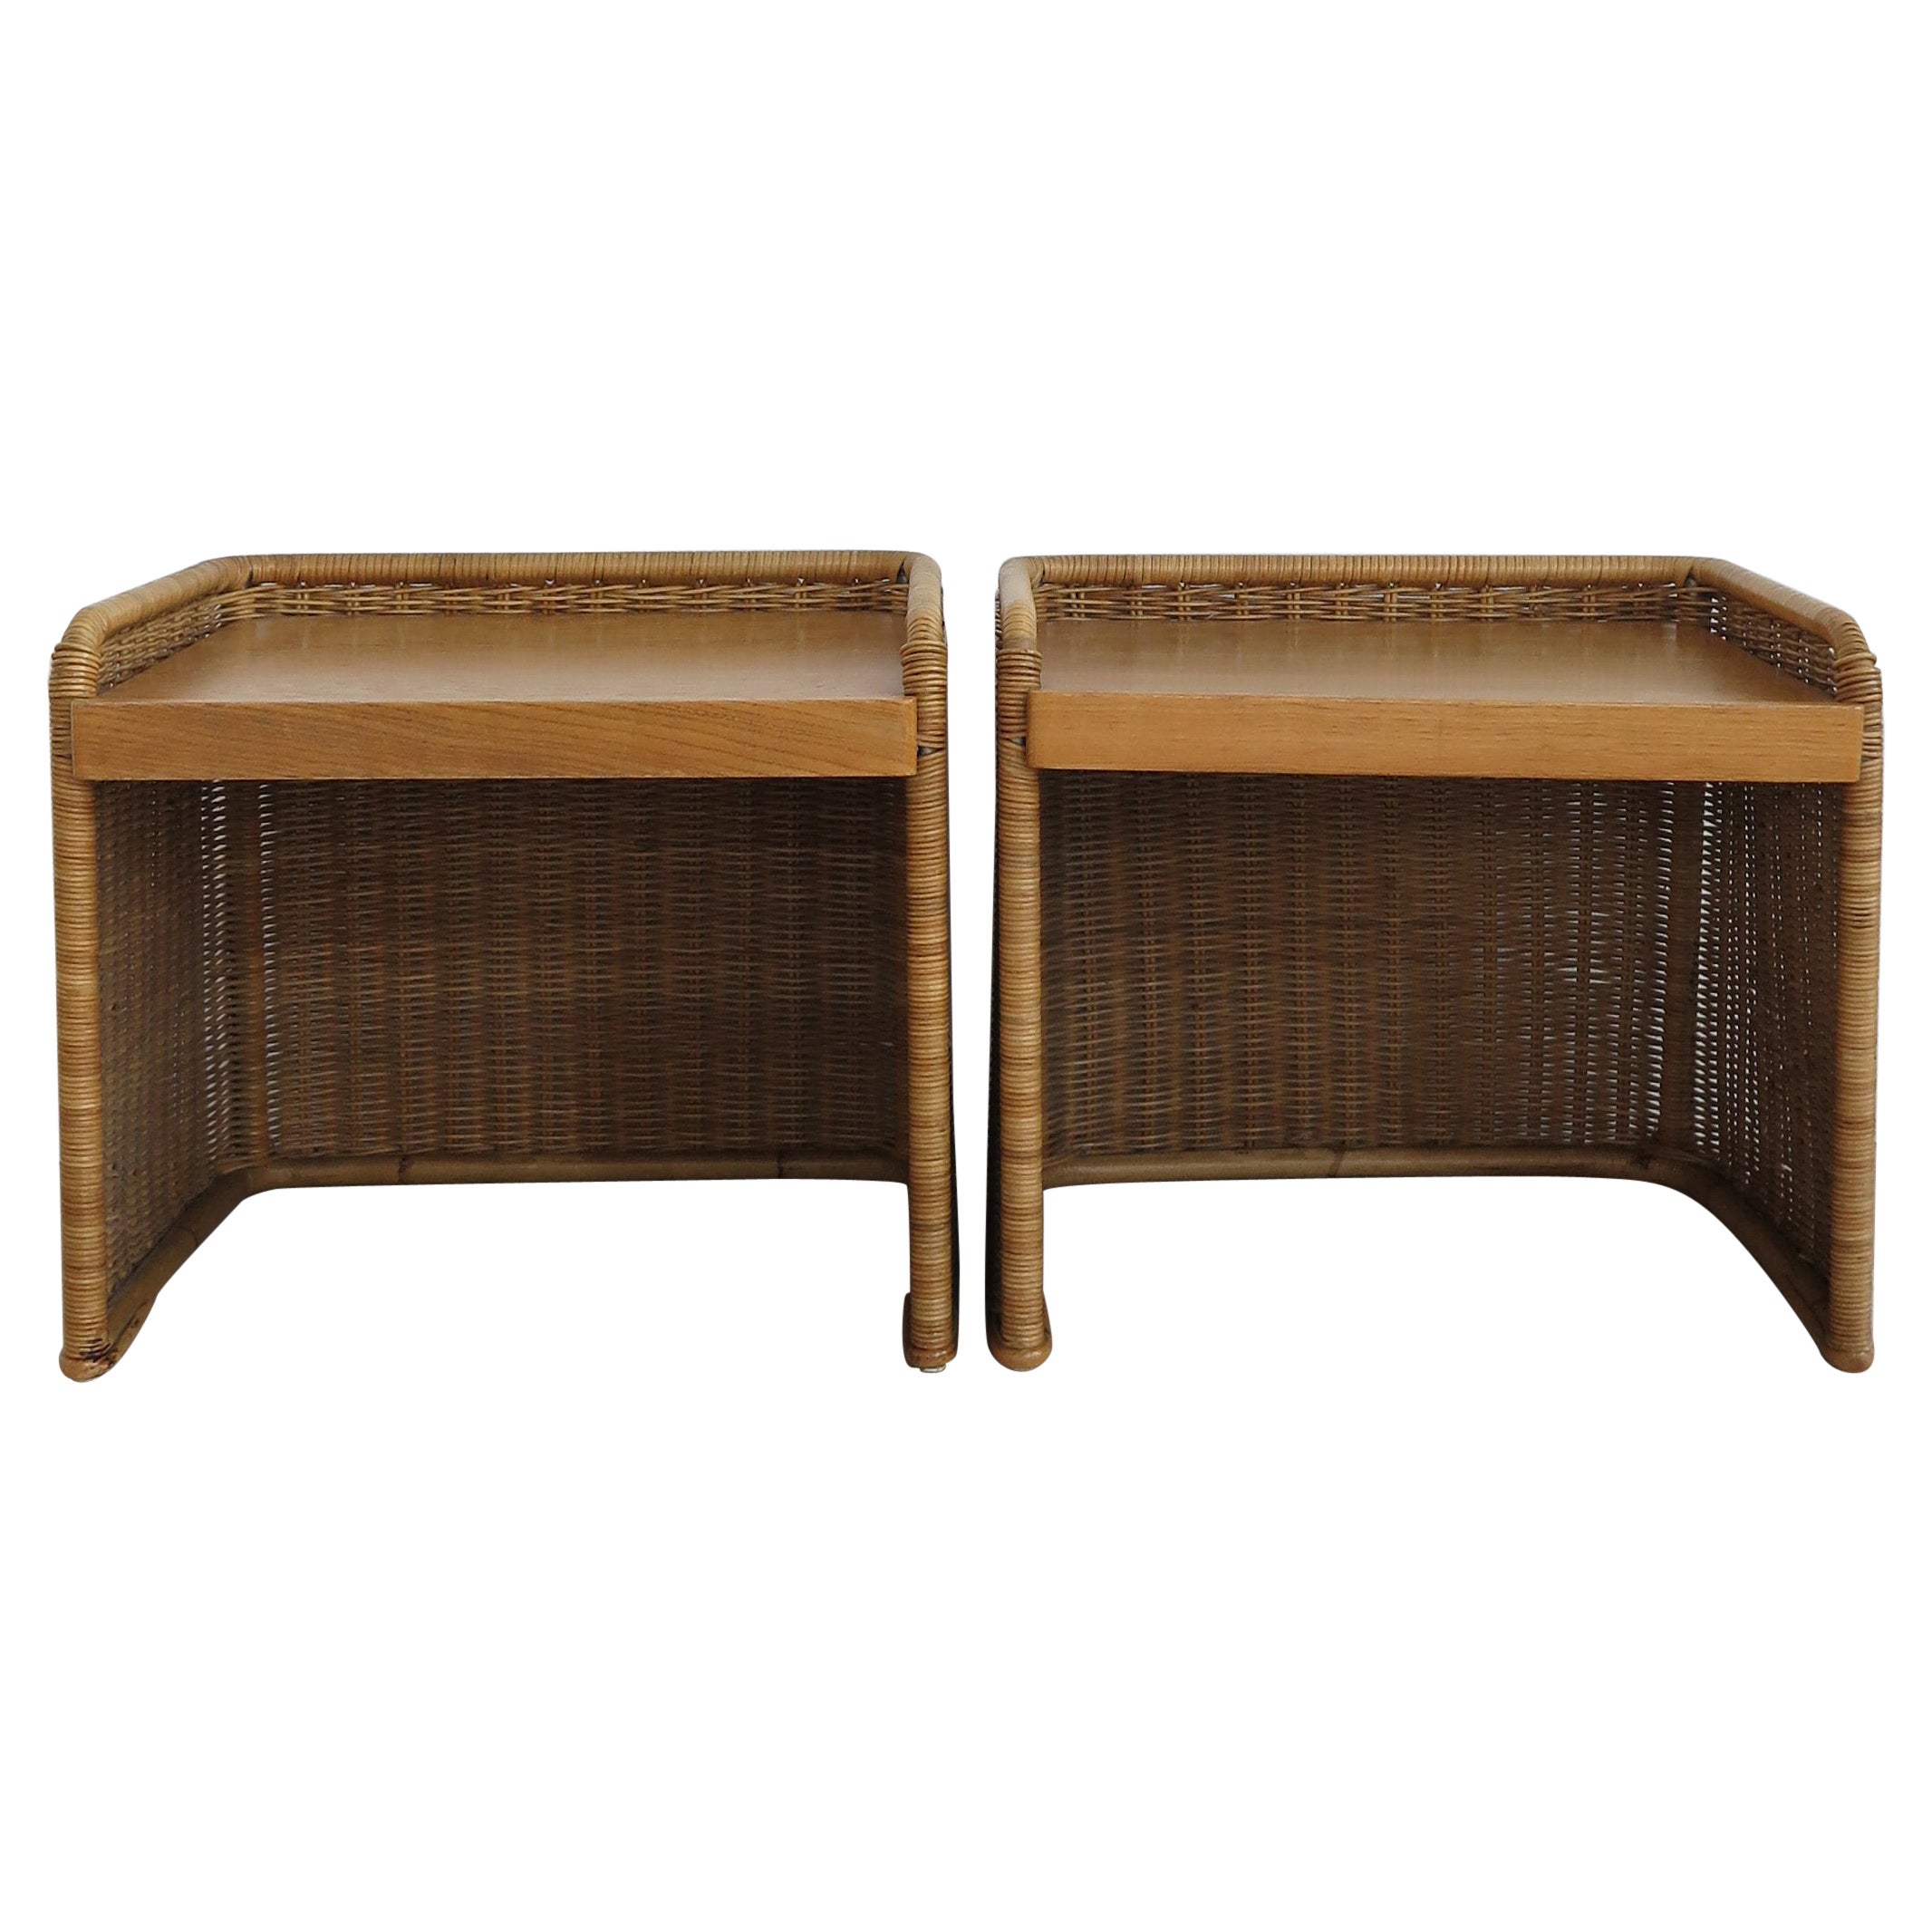 Italian Midcentury Rattan Bamboo Bedside Tables Night Stands, 1950s For Sale